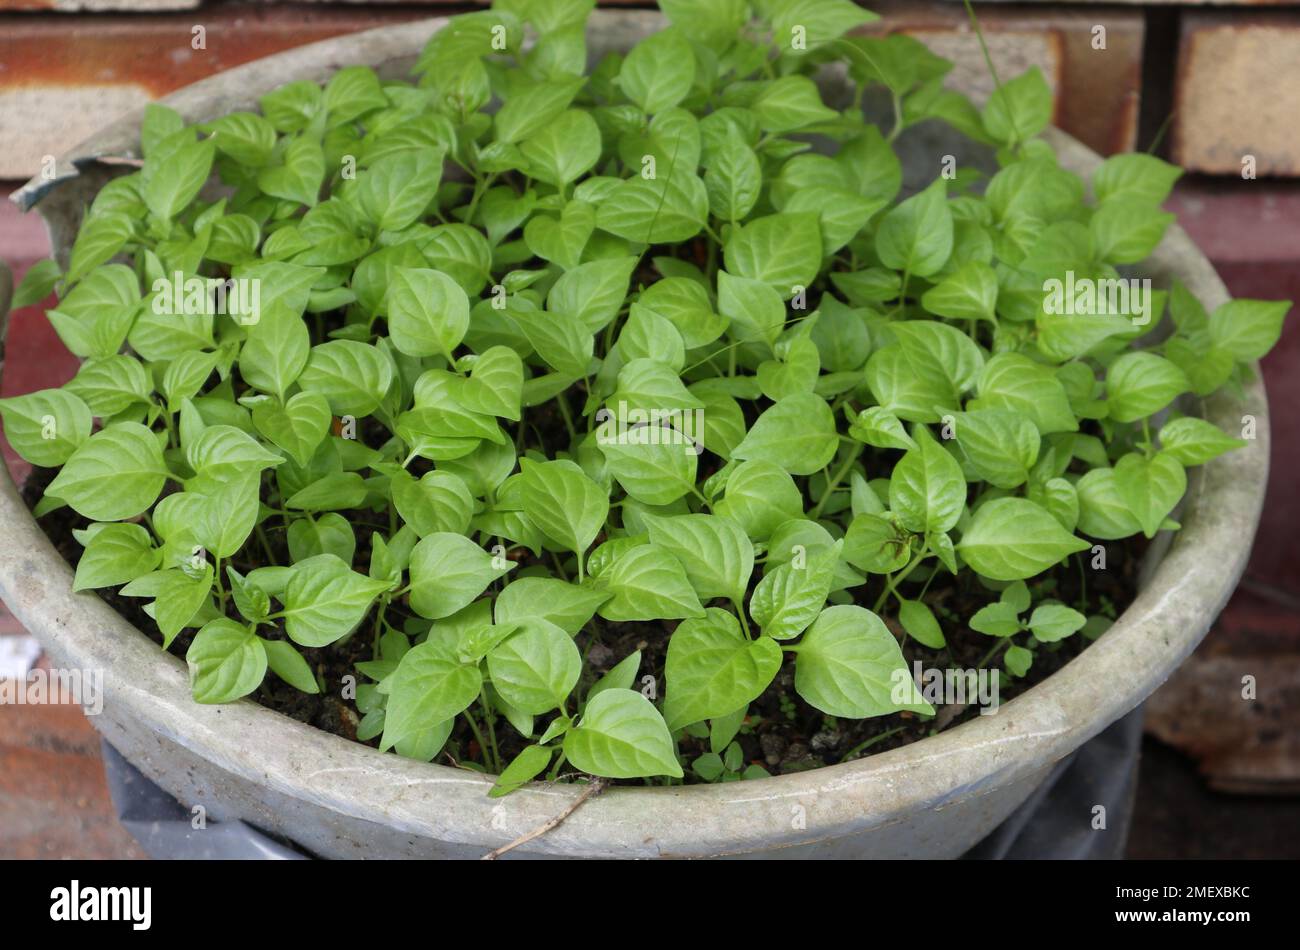 High angle view of lots of small Chili plants growing on bucket at a plant nursery Stock Photo